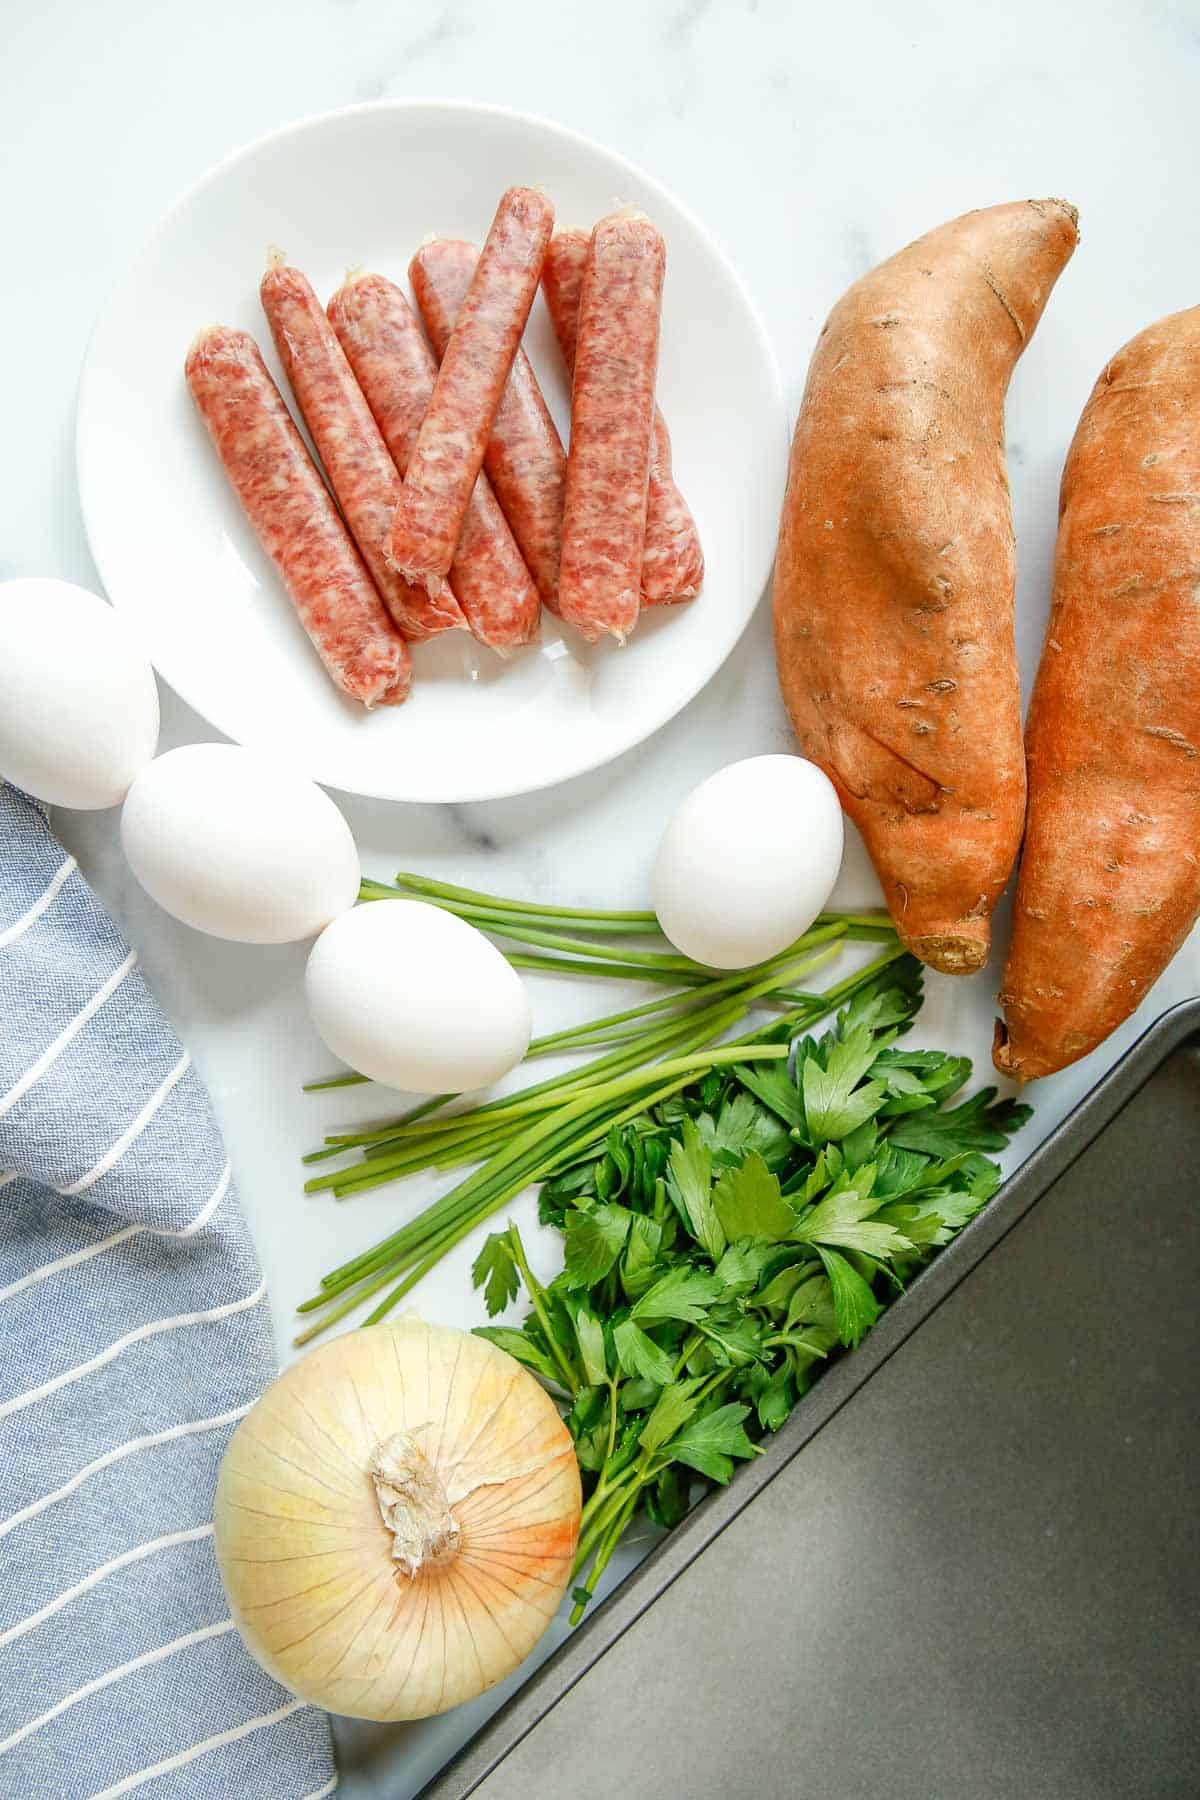 Overhead view of sweet potatoes, sausage, an onion, eggs, and fresh herbs.